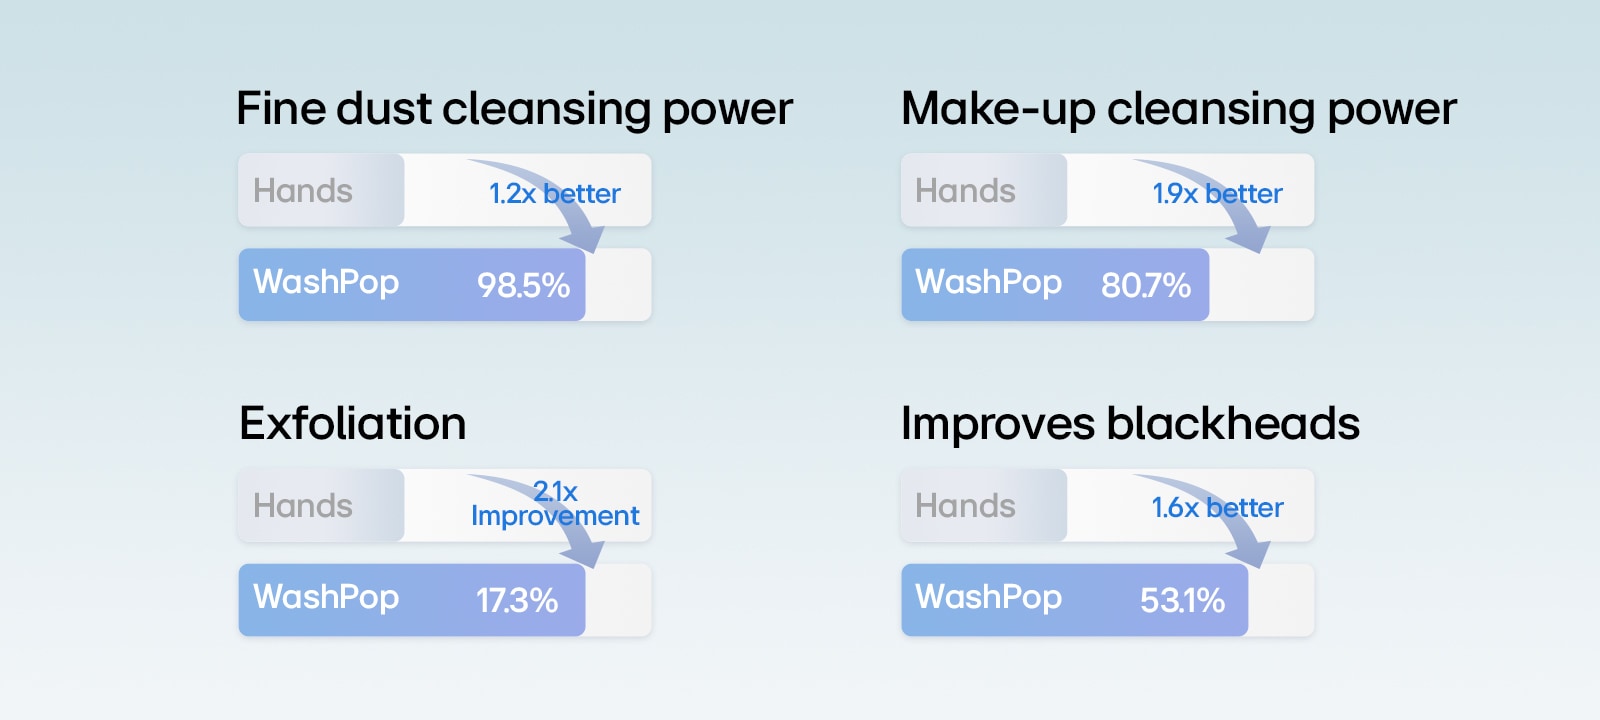 It shows the difference in cleaning power between using hands and using WashPop in a graph.